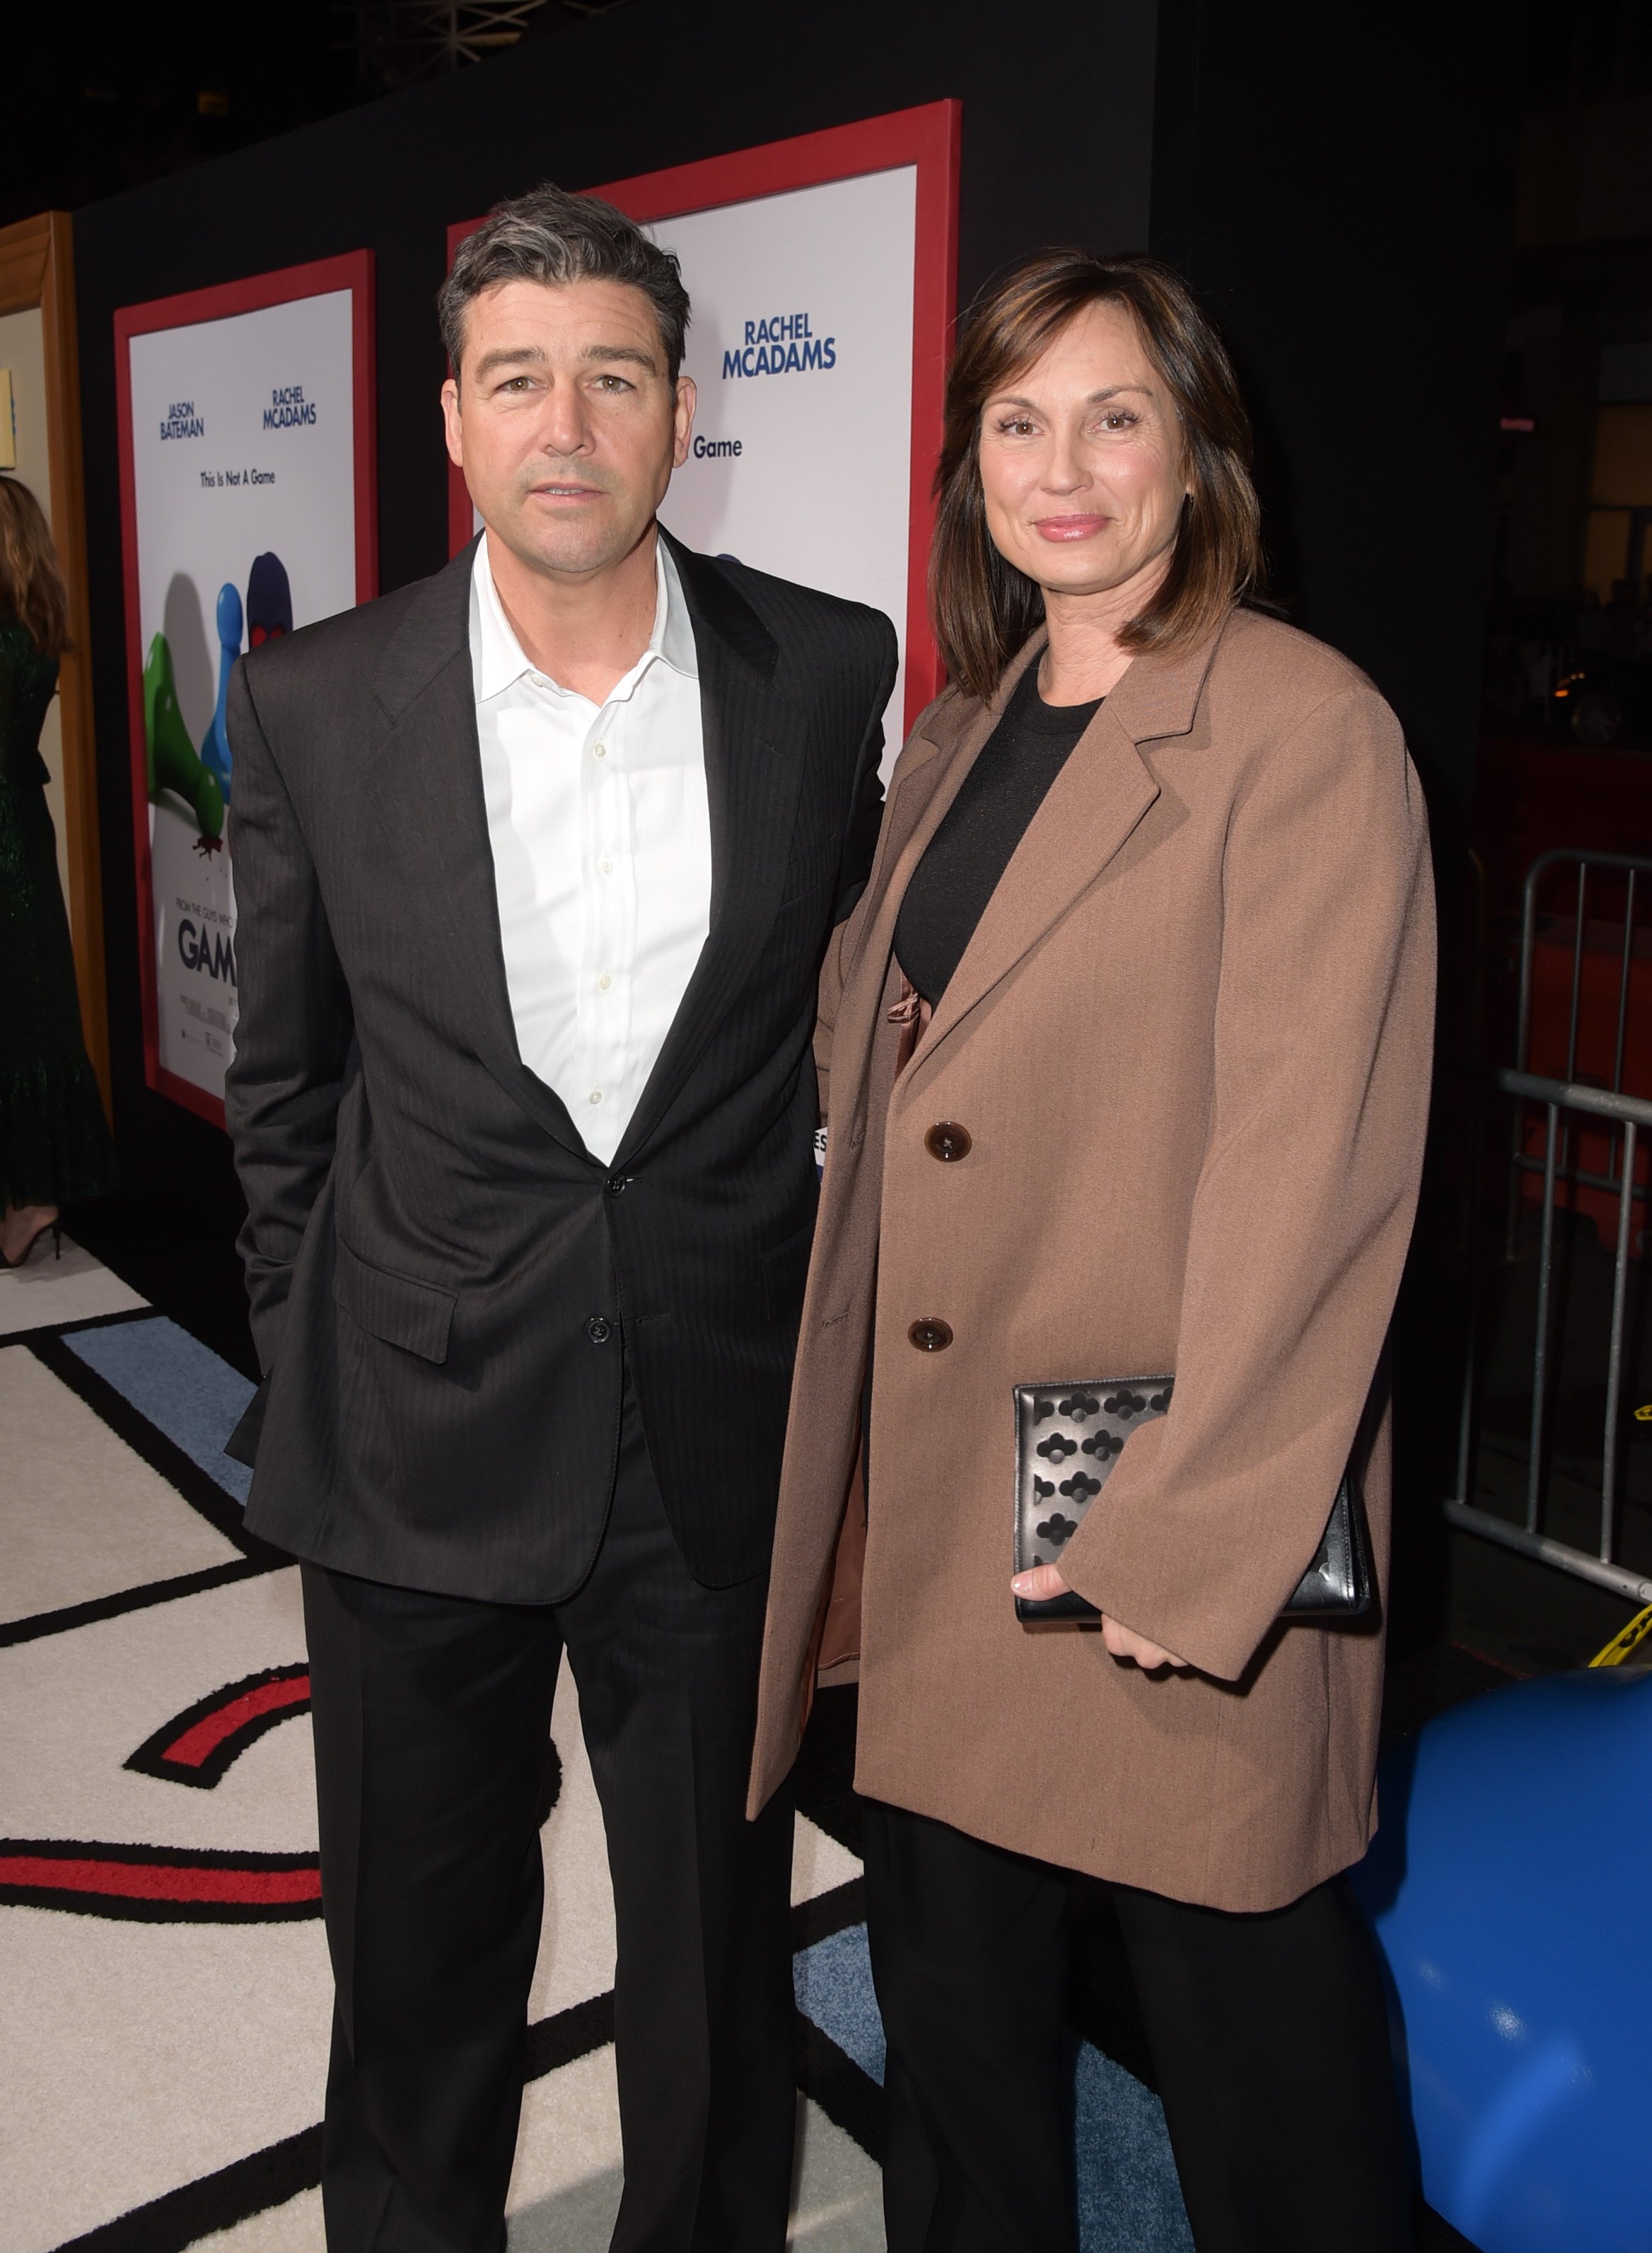 Kyle Chandler and Kathryn Chandler at the premiere of "Game Night" on February 21, 2018, in California. | Source: Getty Images